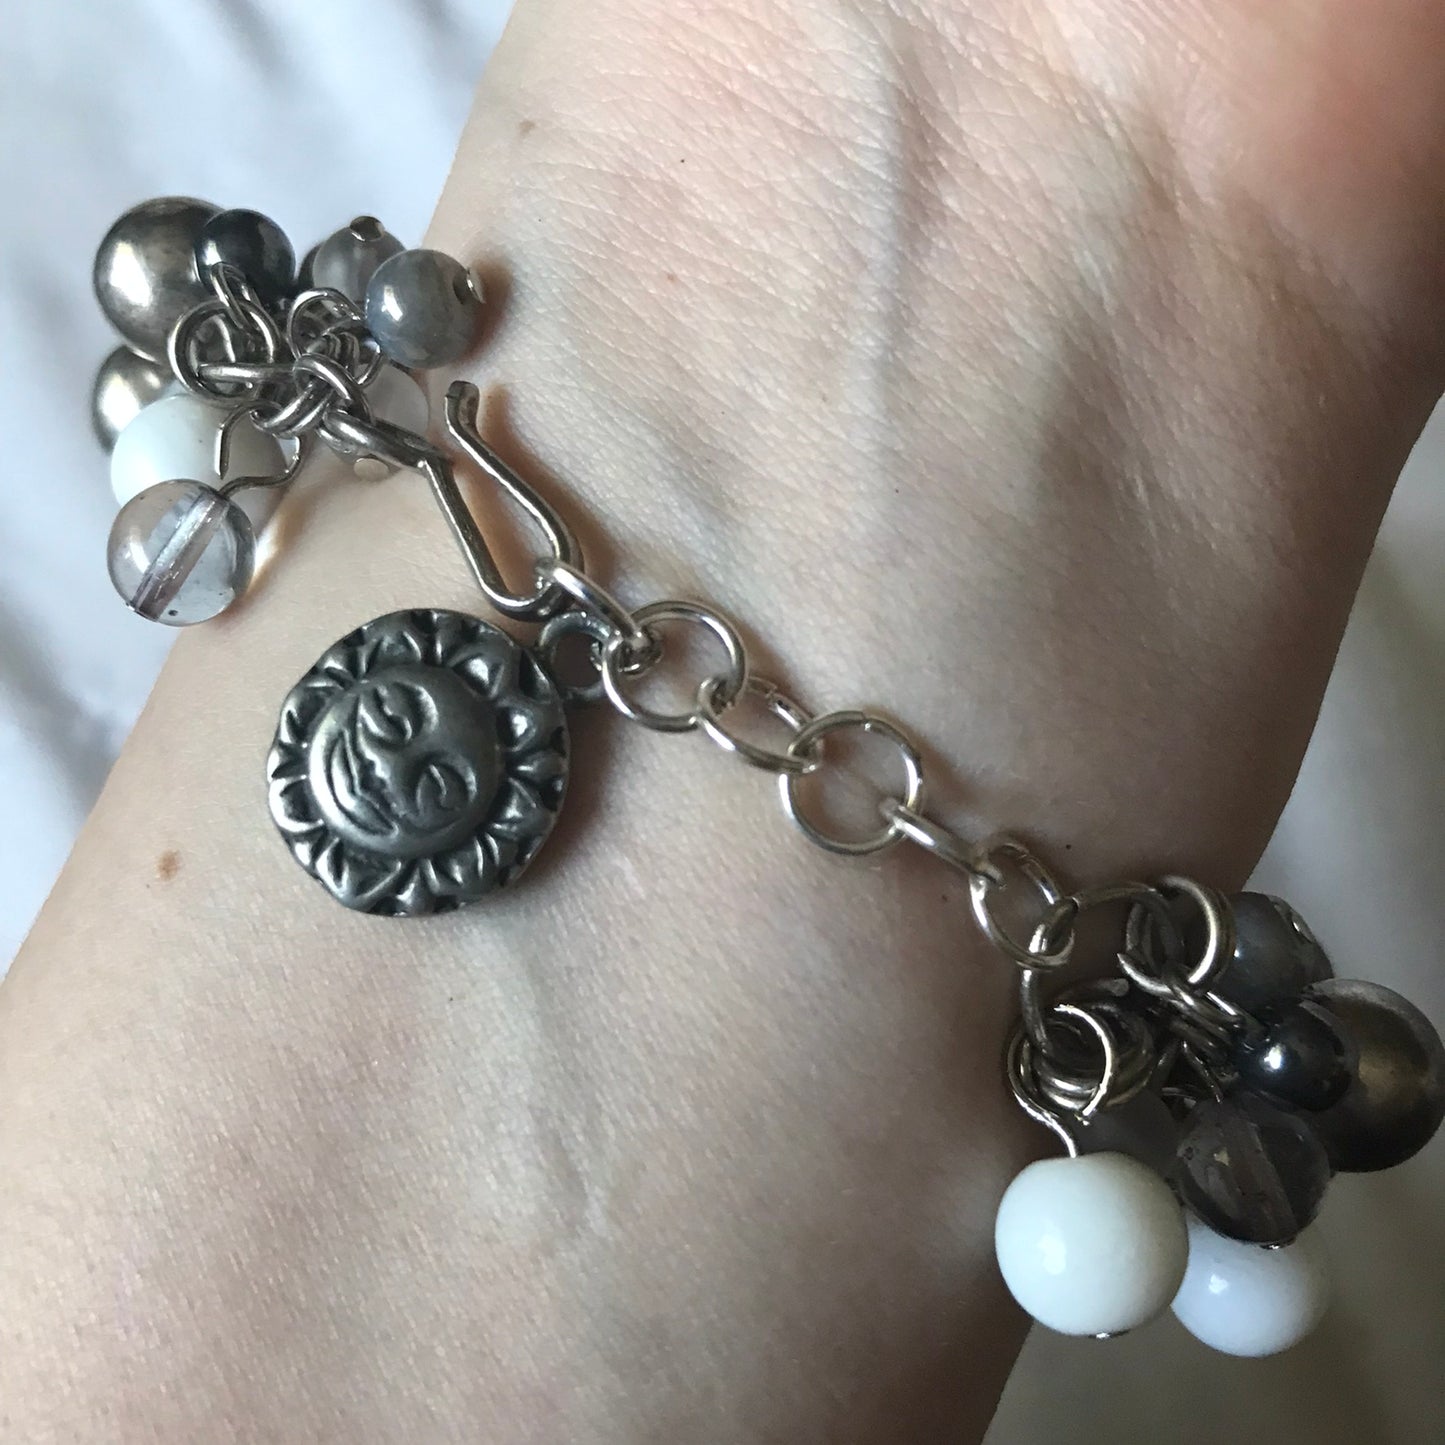 CELESTIAL CHARM BRACELET ON THE WRIST SHOWING THE CLASP  WITH THE SUN SIDE OF THE EXTENSION CHARM